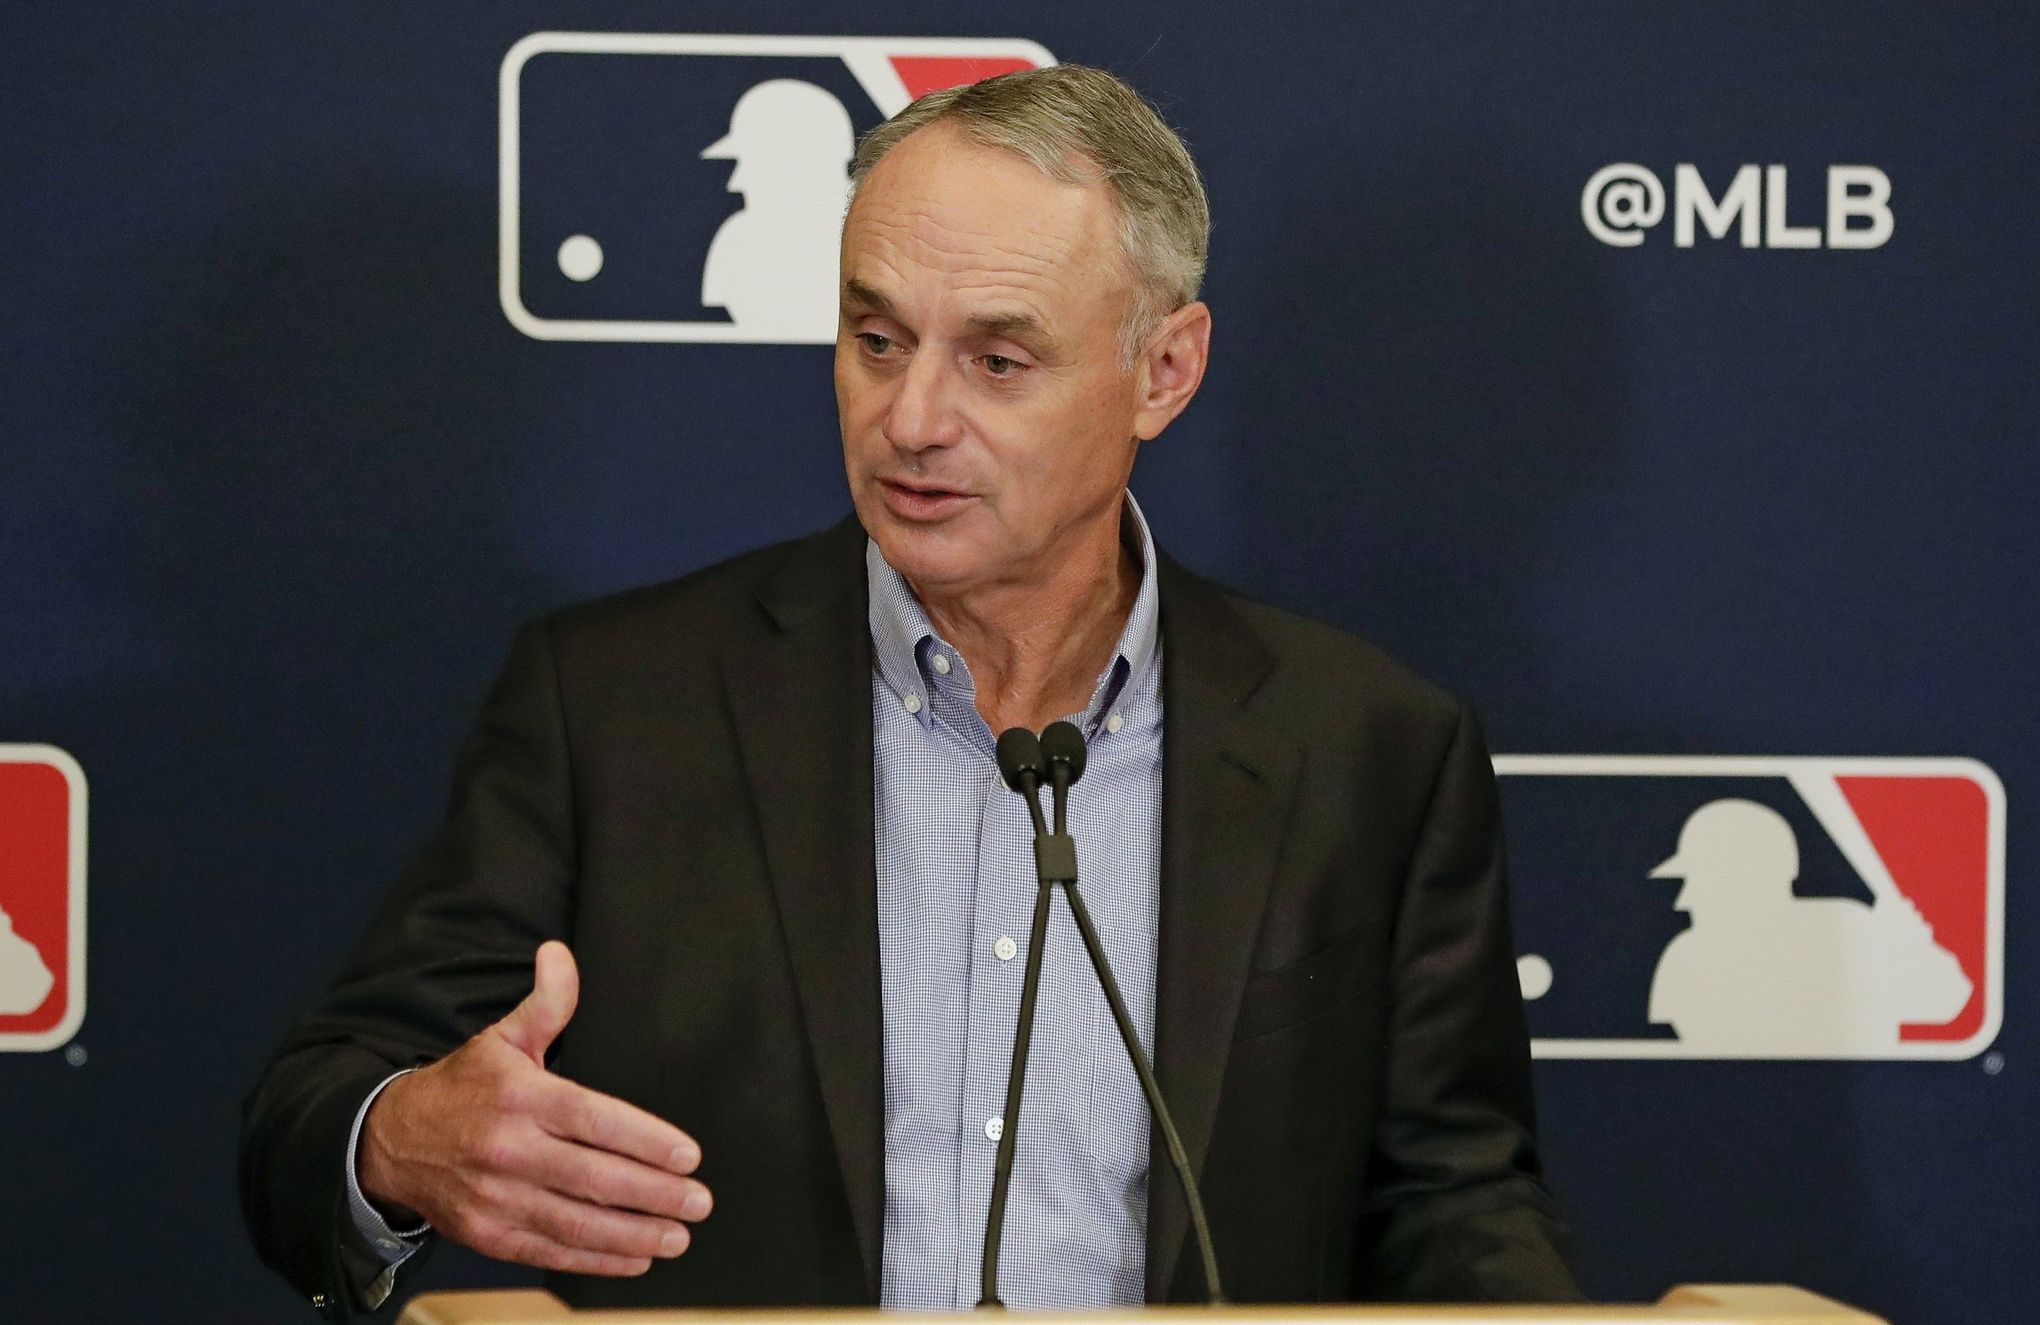 Cactus League, Arizona cities ask MLB to delay start of spring training  because of COVID-19